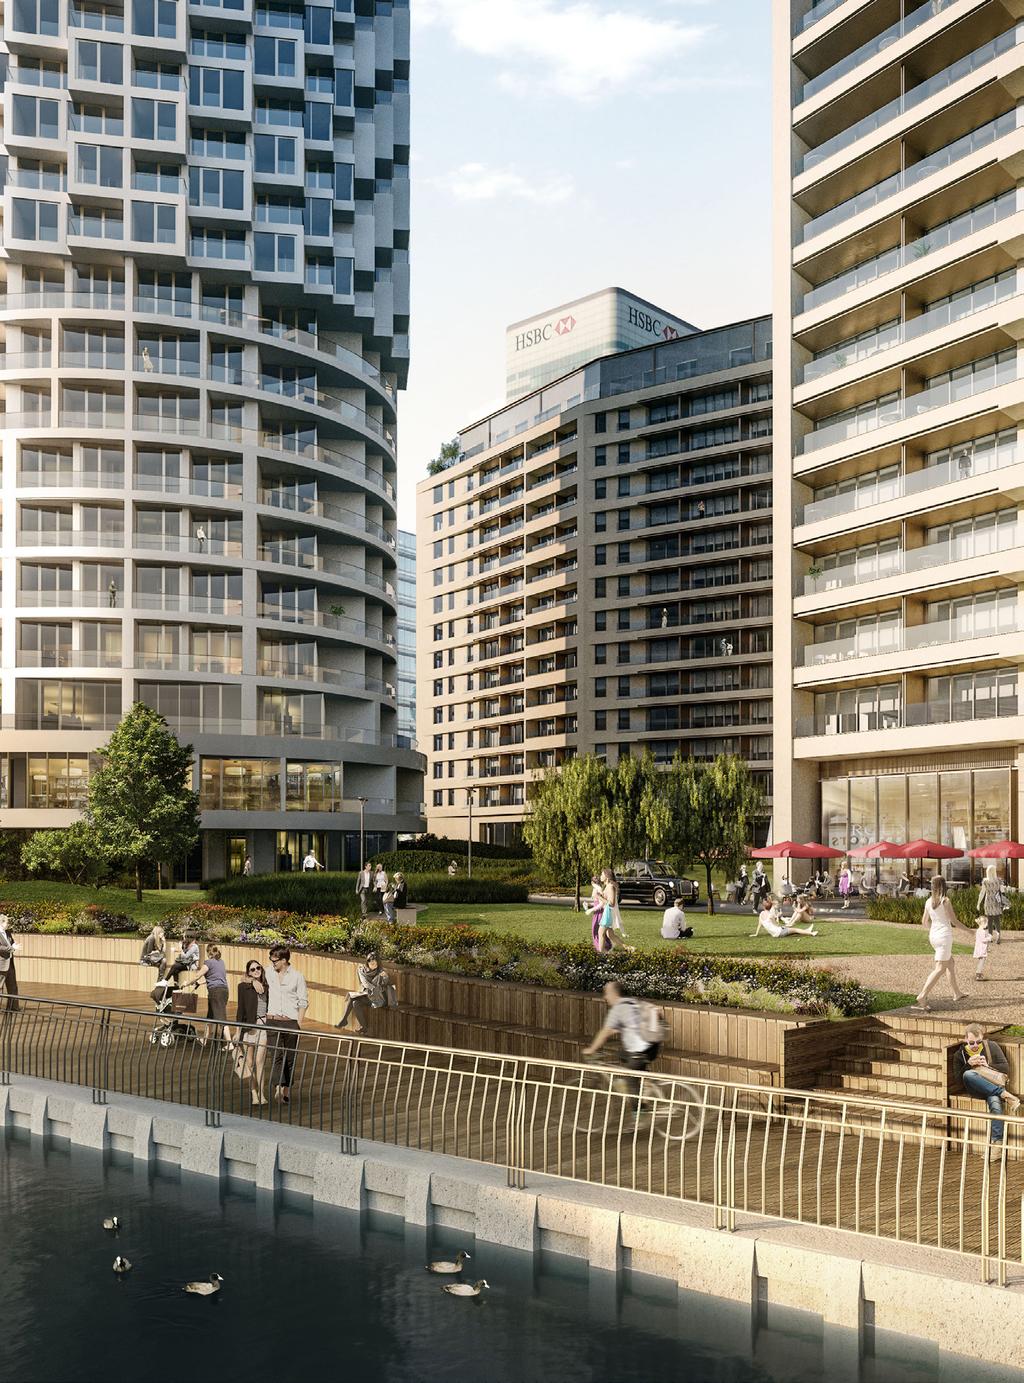 SHAPING WOOD WHARF CANARY WHARF S NEW PHASE Newsletter 01 March 2015 In December 2014, Tower Hamlets Council granted planning permission for the redevelopment of the Wood Wharf site to create a